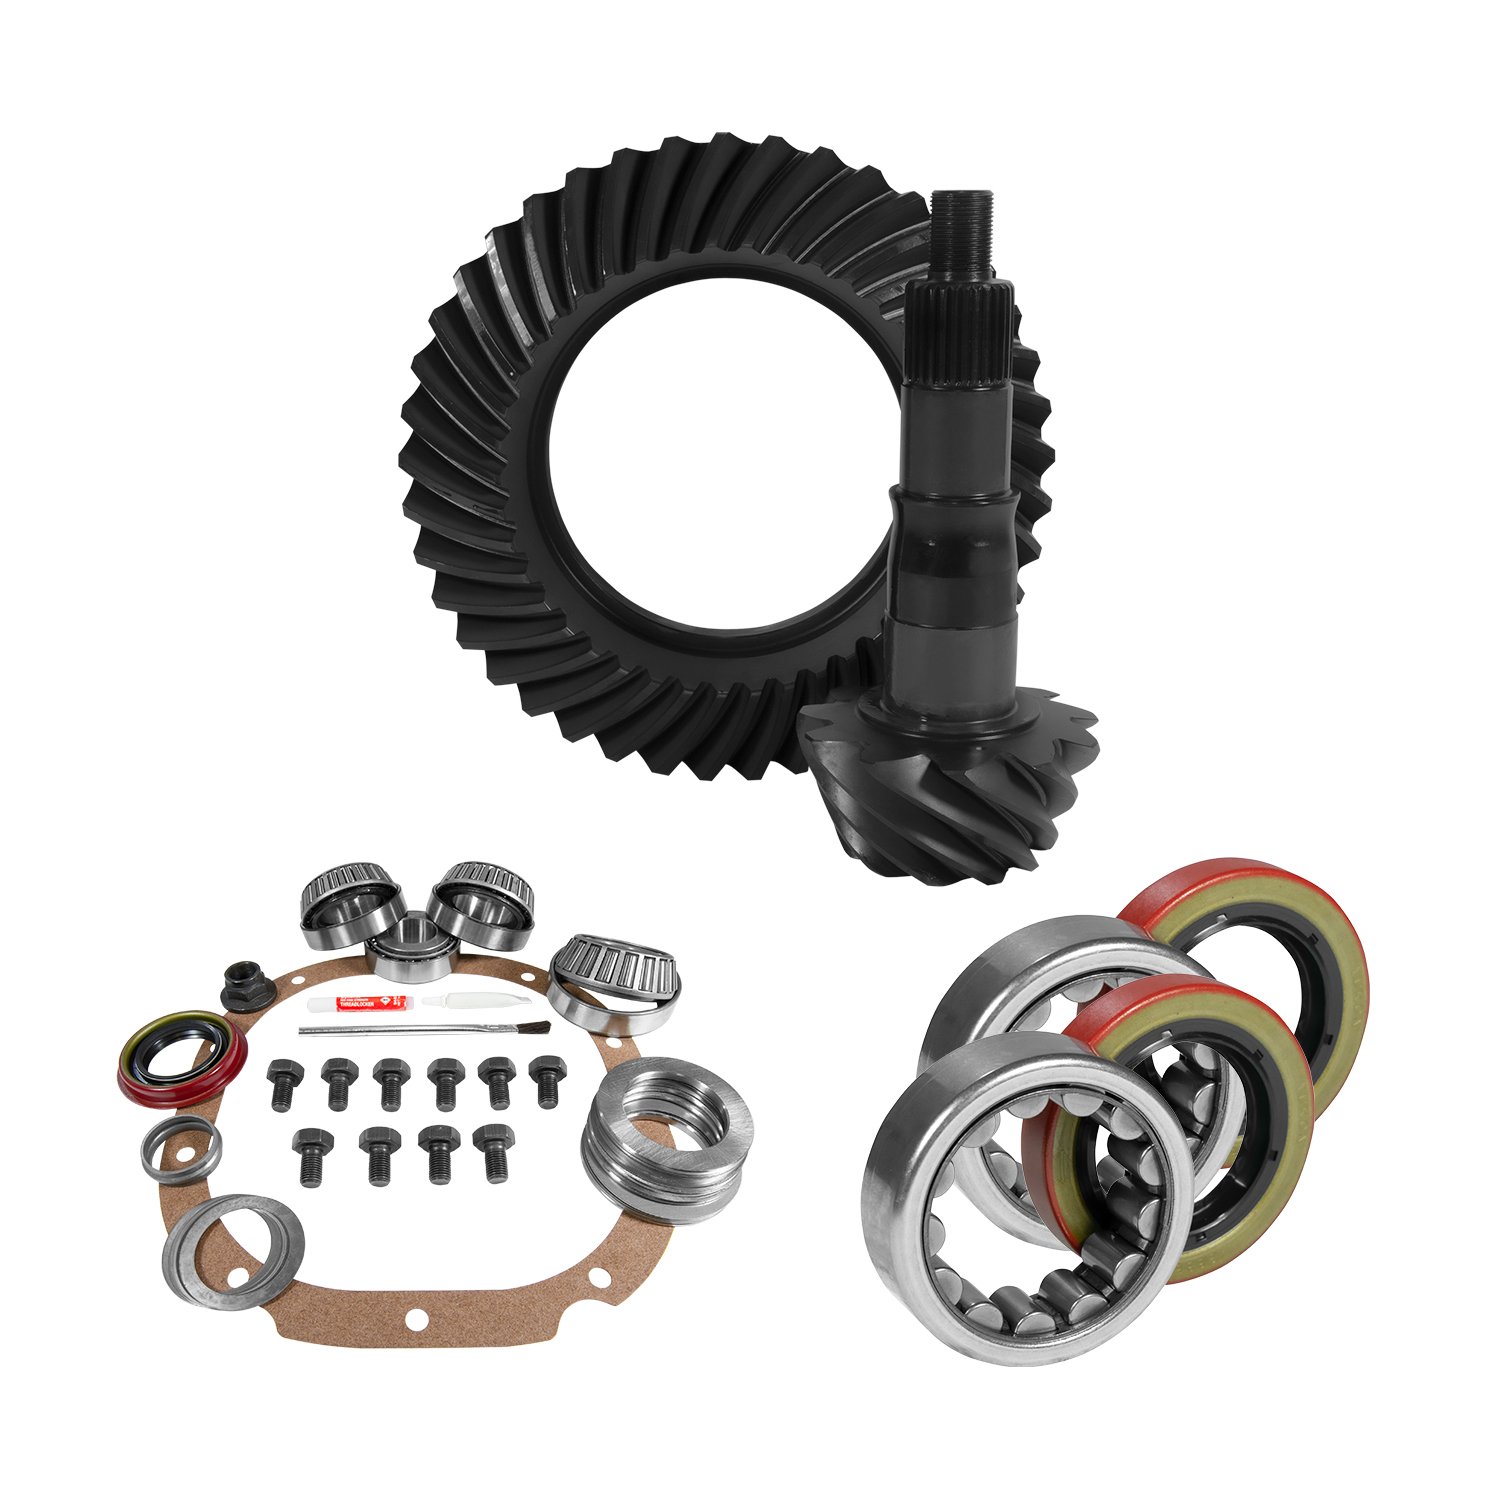 USA Standard 10757 8.8 in. Ford 3.73 Rear Ring & Pinion Install Kit, 2.53 in. Od Axle Bearings & Seals